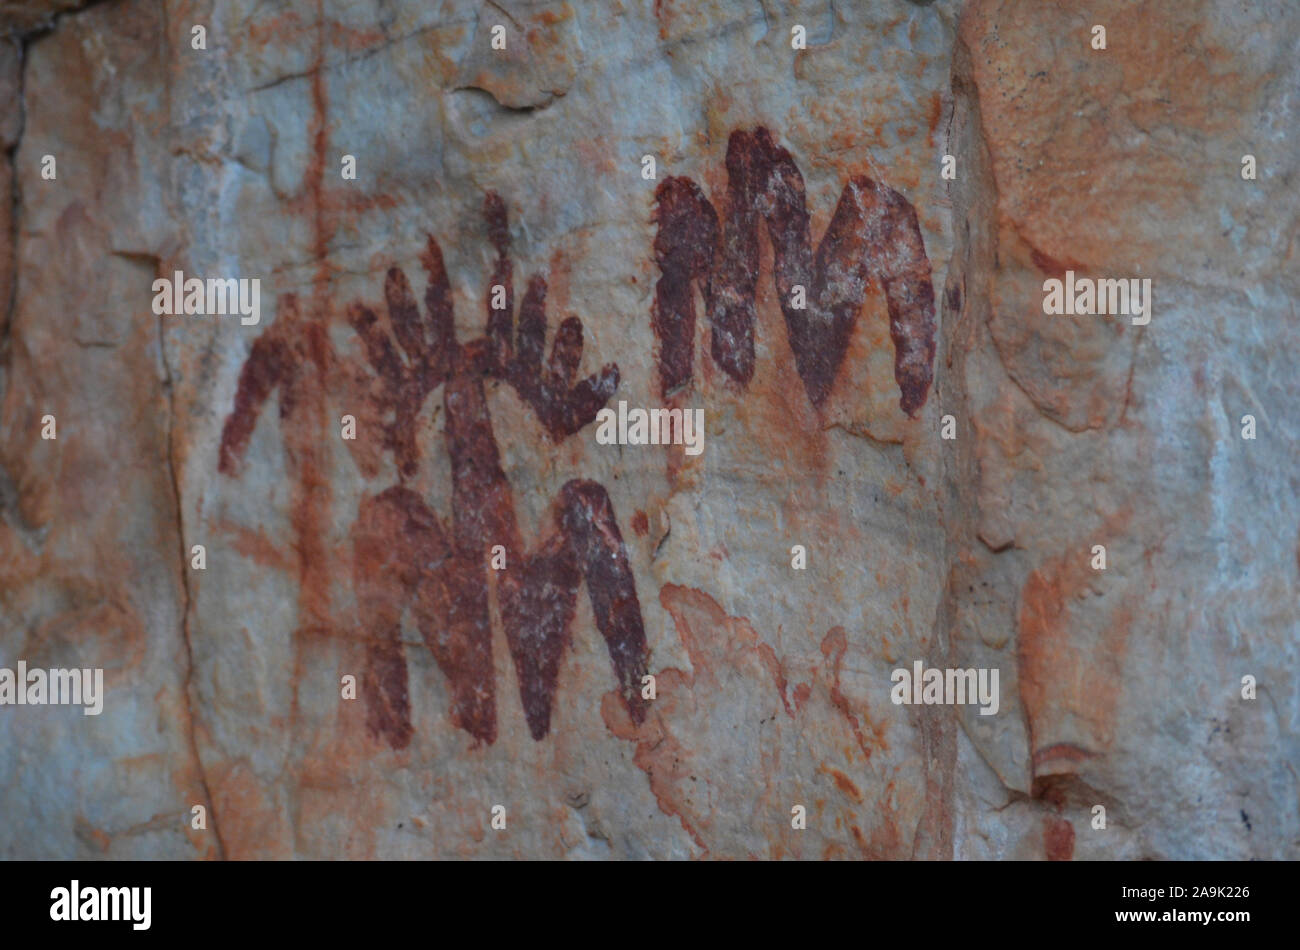 Peña Escrita rock paintings in Fuencaliente (Ciudad Real, Southern Spain), a remarkable example of post-Palaeolithic rock art Stock Photo